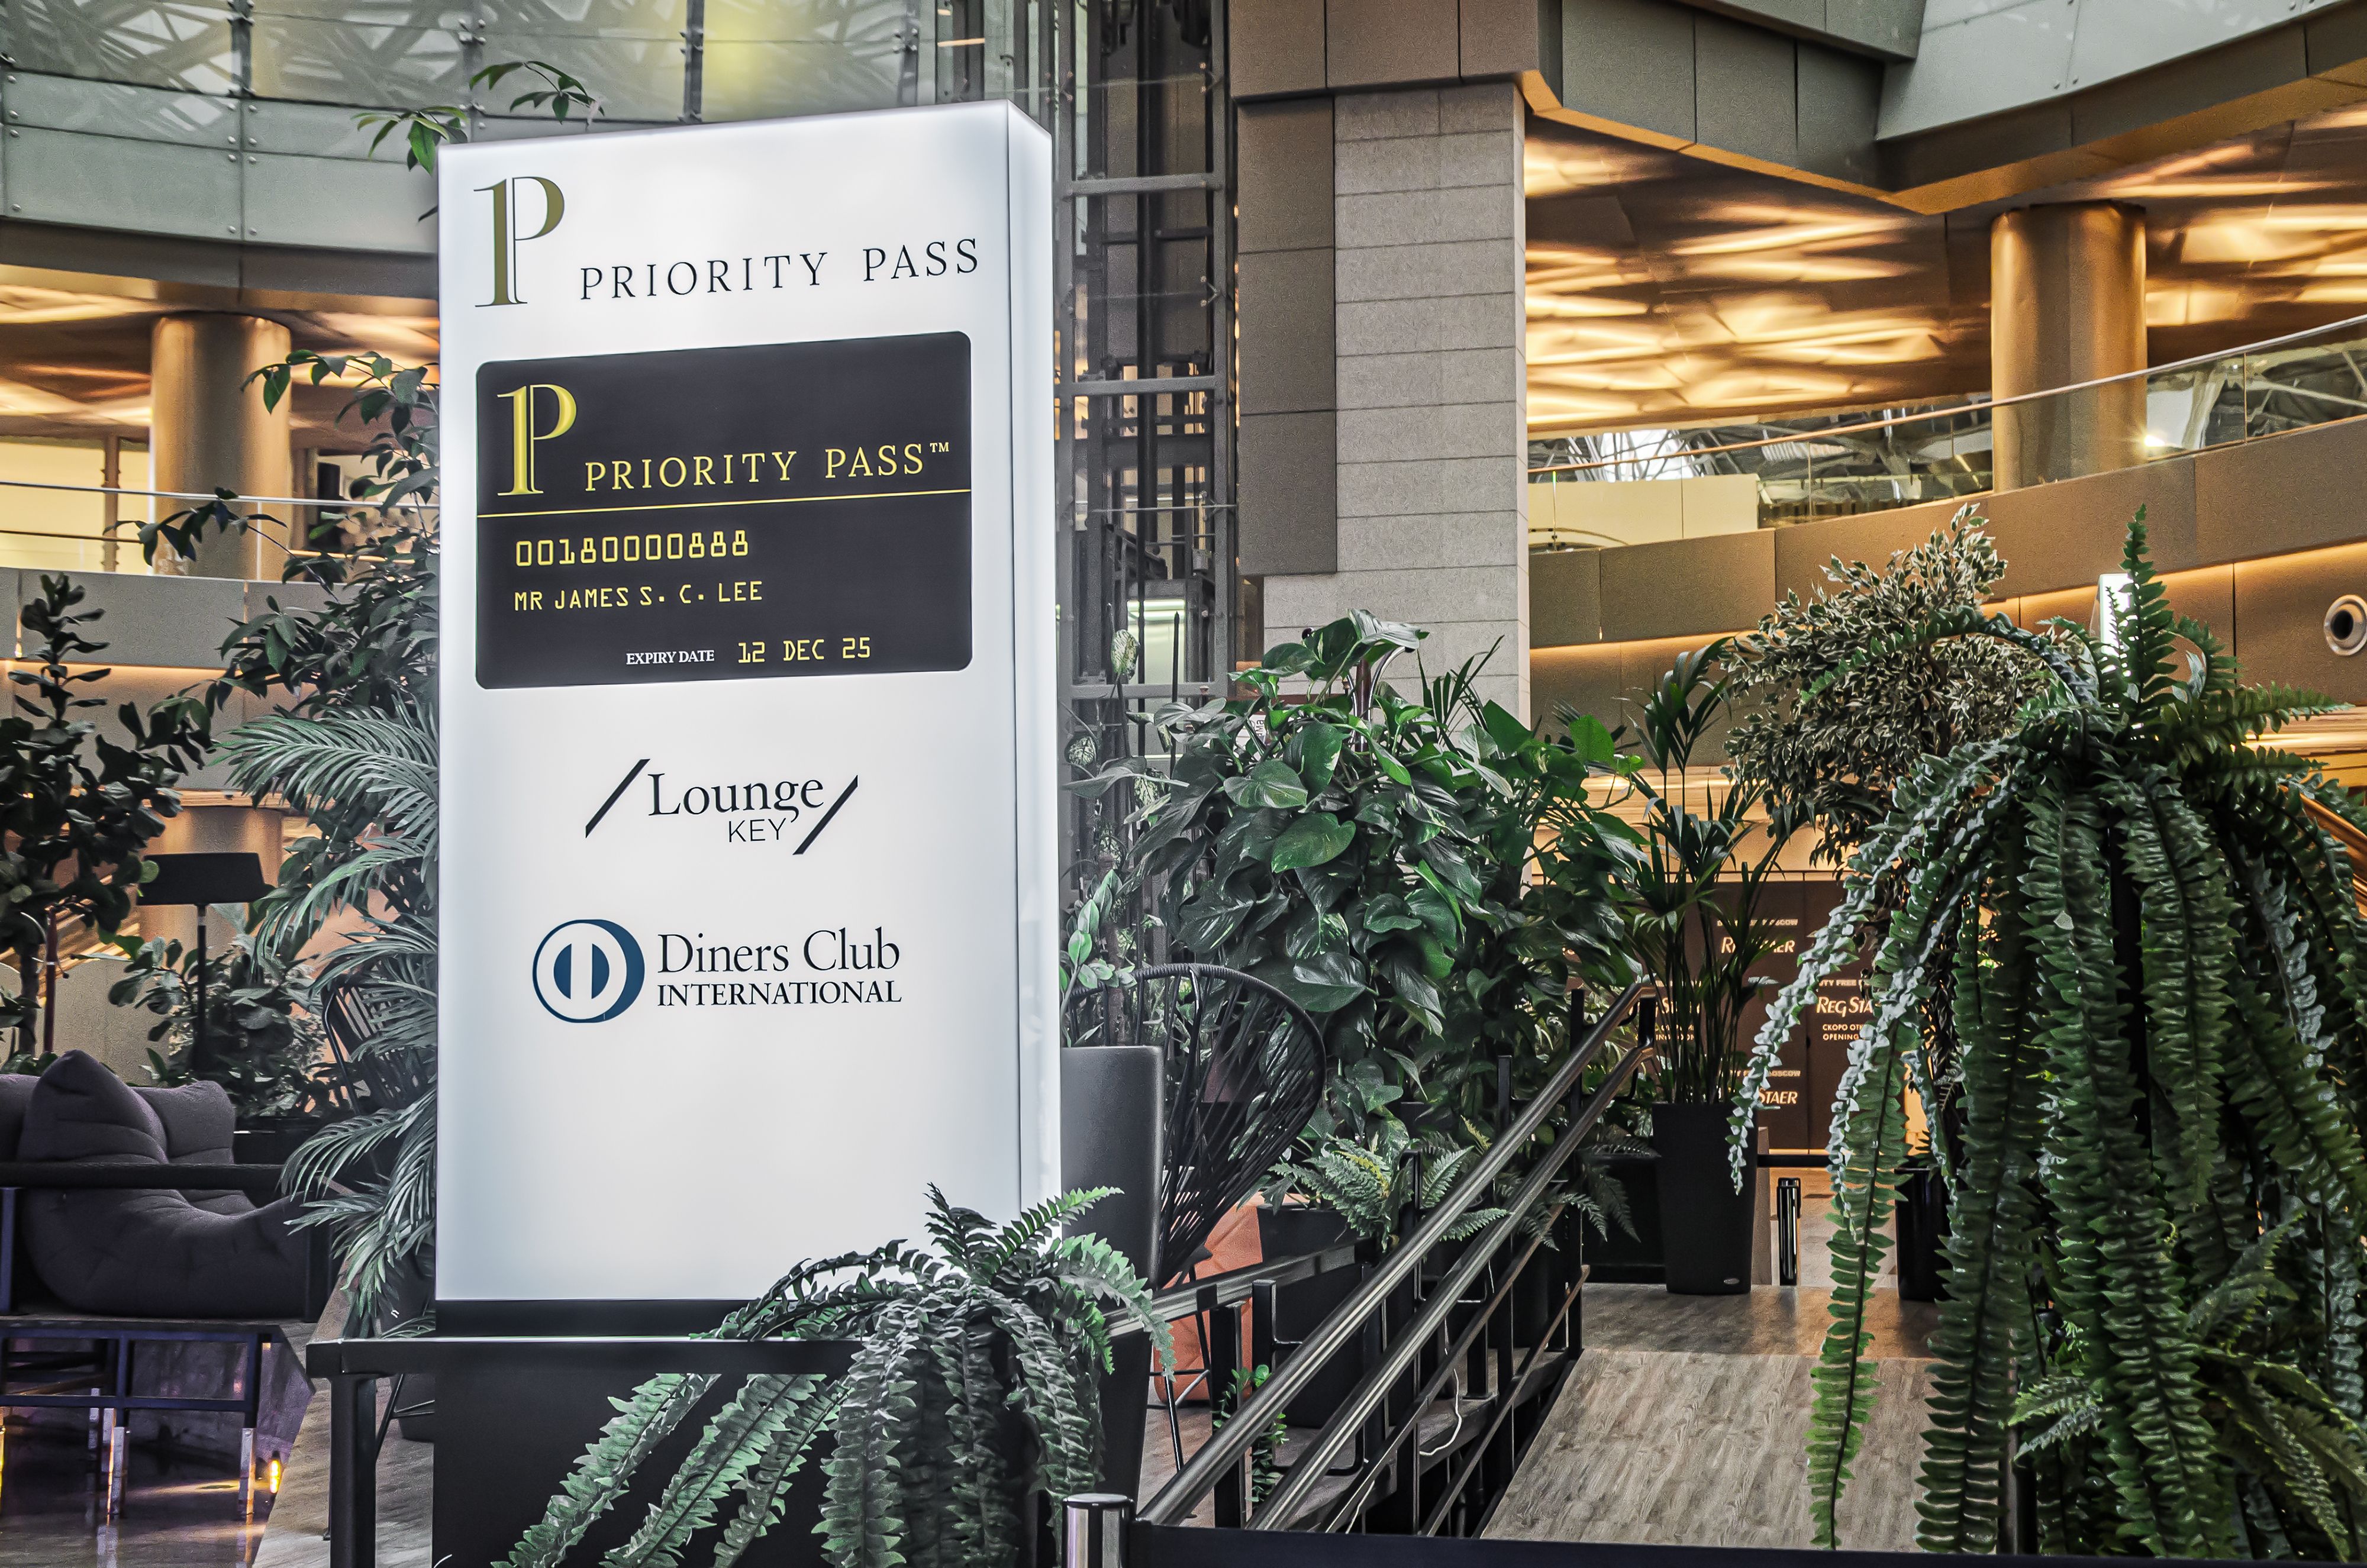 A sign outside of a lounge with the Priority Pass, Diners Club International, and Lounge Key logos.